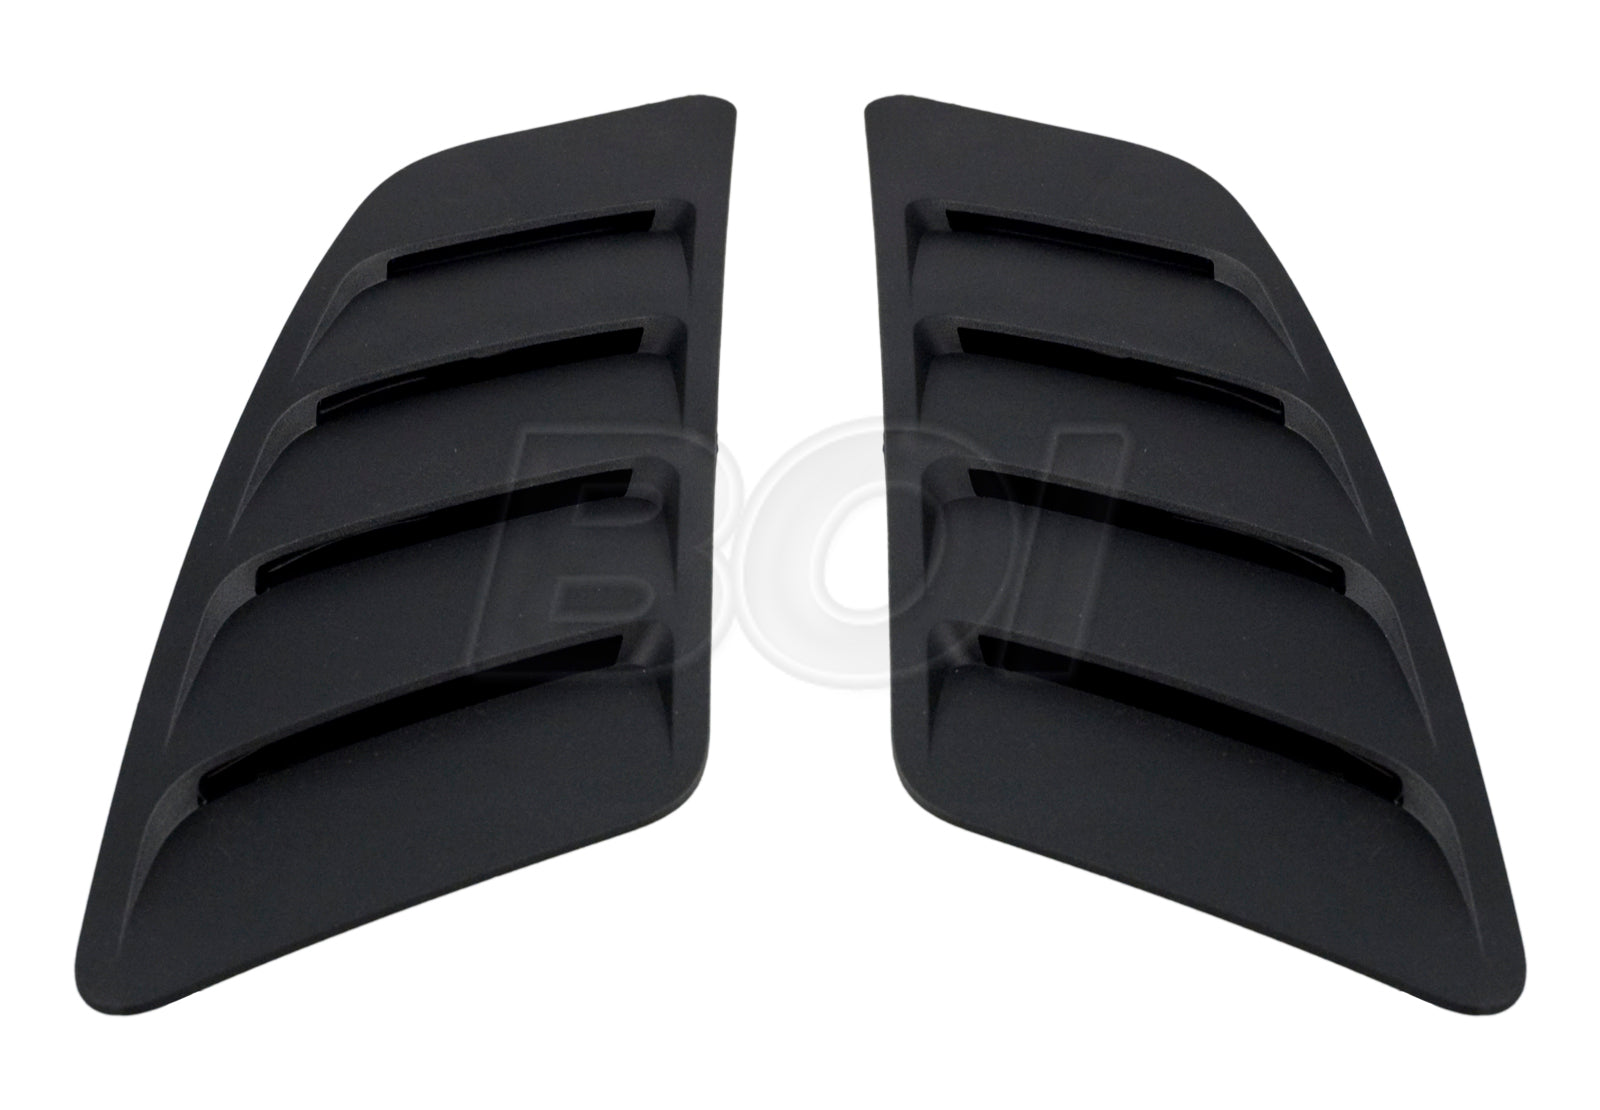 2015-2017 Ford Mustang GT 5.0 Roush 421869 Hood Vent Heat Extractors Black Pair